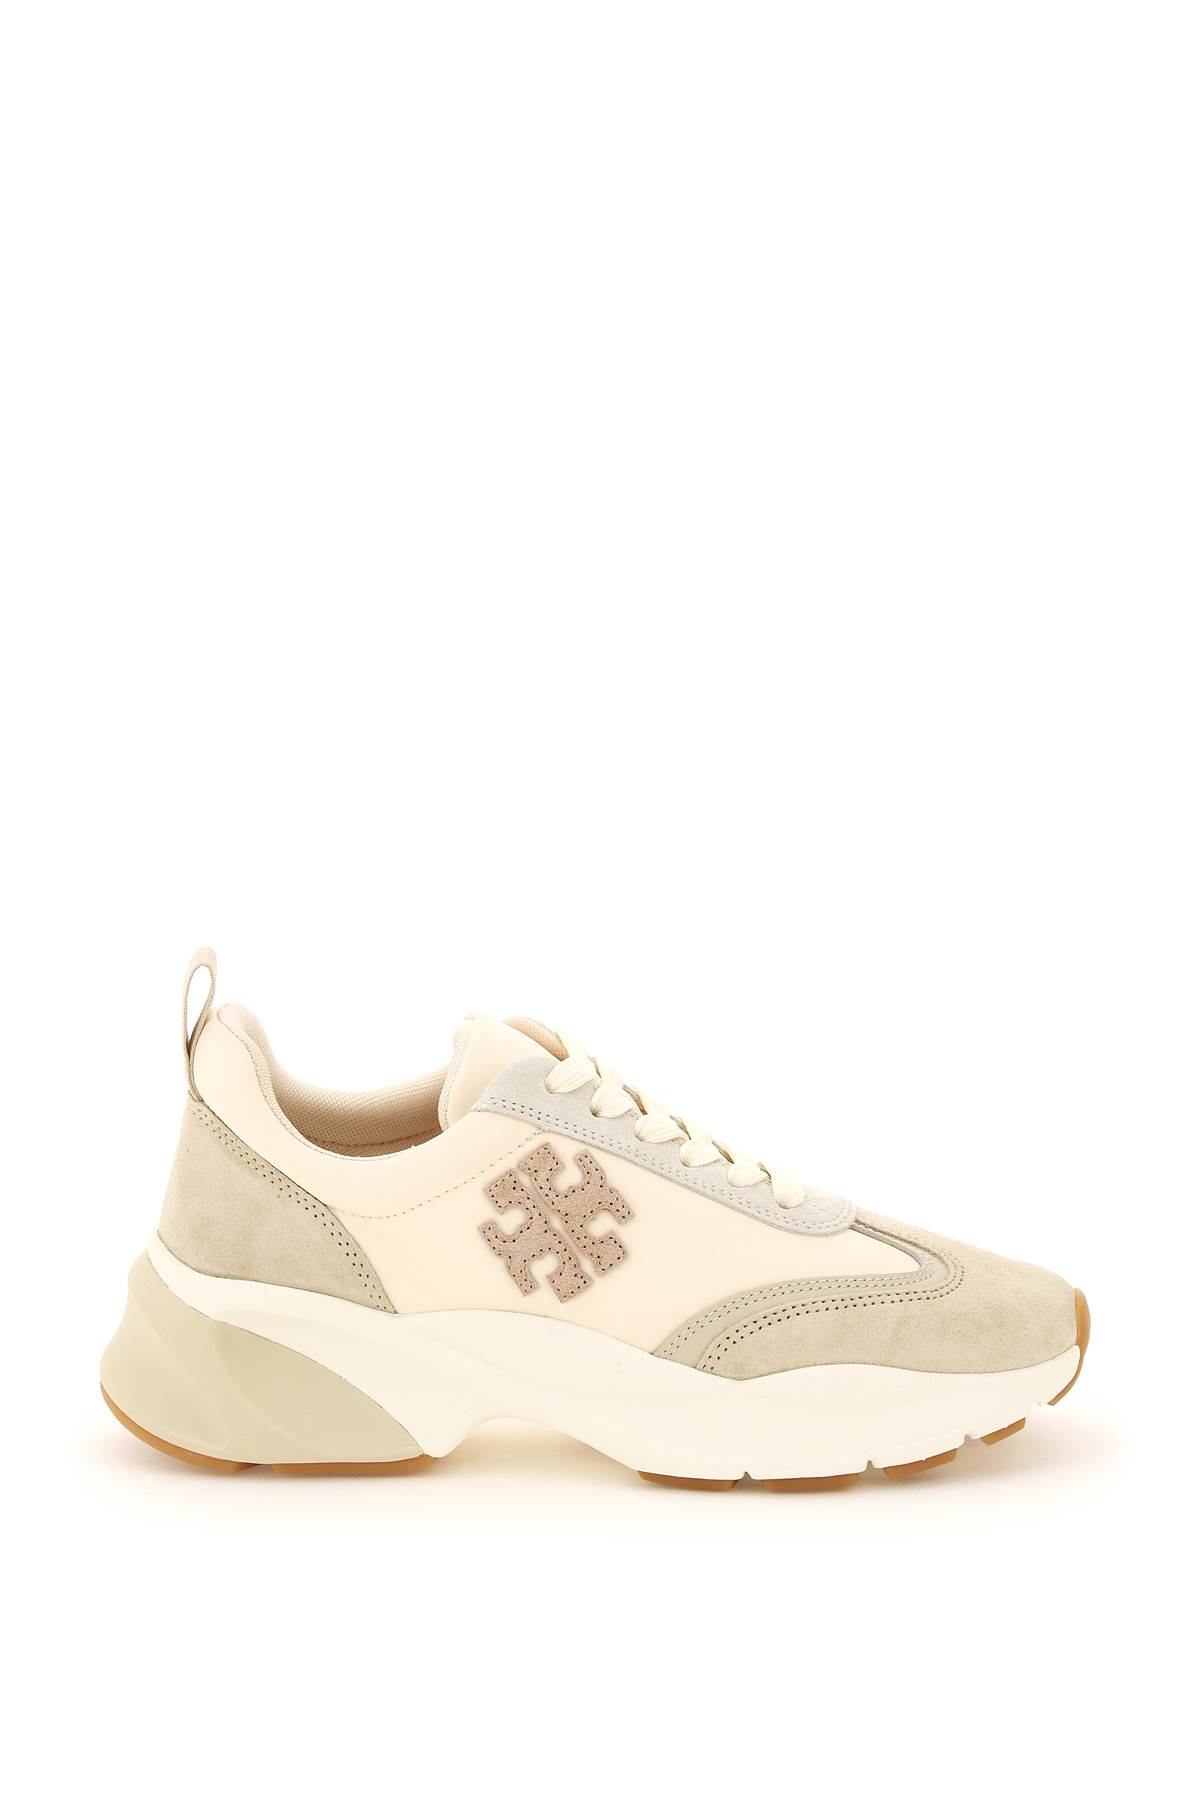 TORY BURCH SUEDE AND NYLON GOOD LUCK SNEAKERS